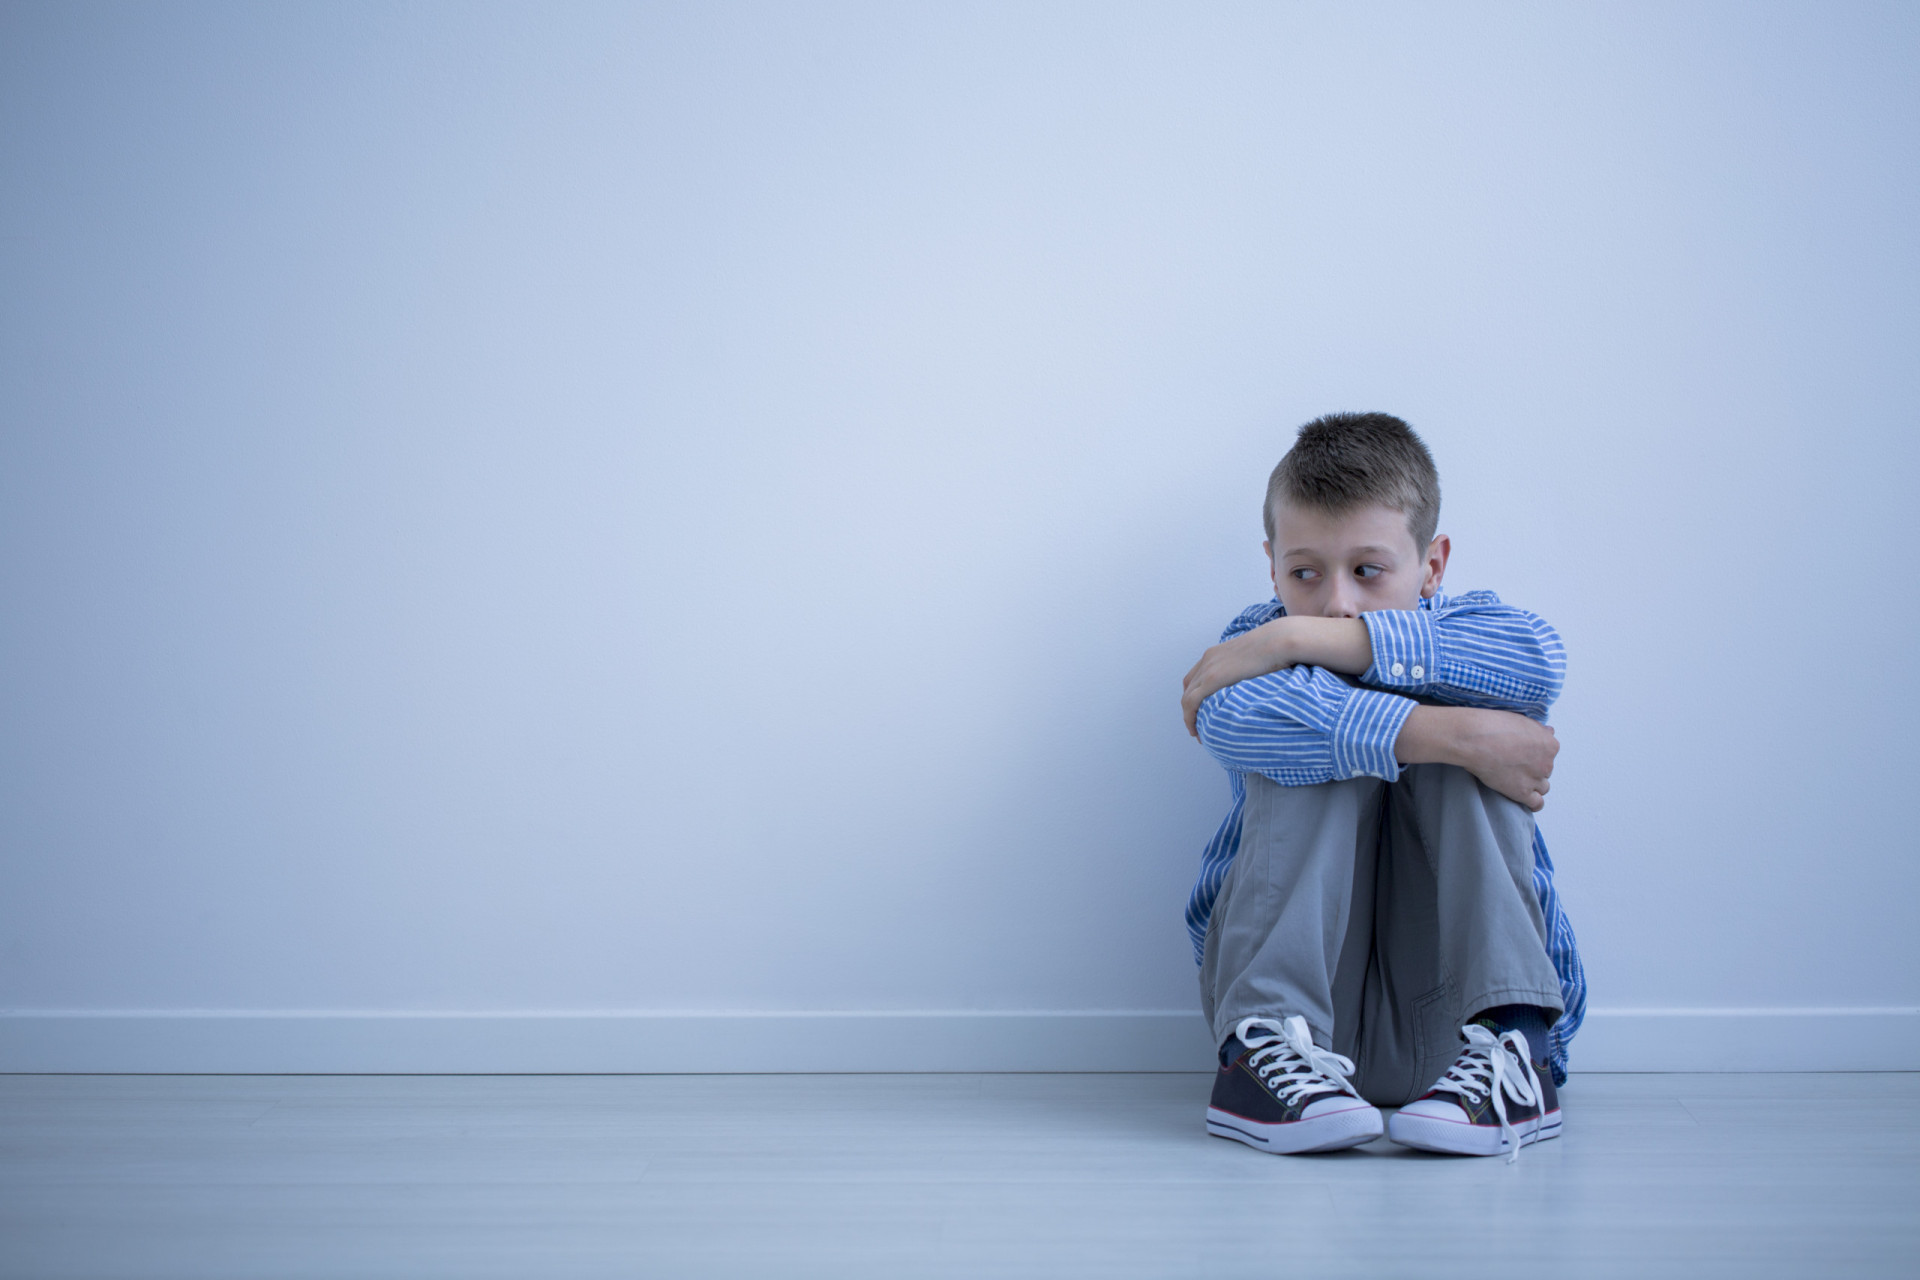 <p>Selective mutism is best described as an <a href="https://www.starsinsider.com/lifestyle/500234/how-to-beat-eco-anxiety" rel="noopener">anxiety</a> disorder that causes a normally verbal person to be unable to speak when exposed to certain situations. While it is estimated to affect around one in 140 young children, awareness about selective mutism is relatively low. That said, there are certain misconceptions about the condition that have to be dispelled.</p> <p>Check out this gallery to learn about selective mutism and what can be done about it.</p><p>You may also like: </p>